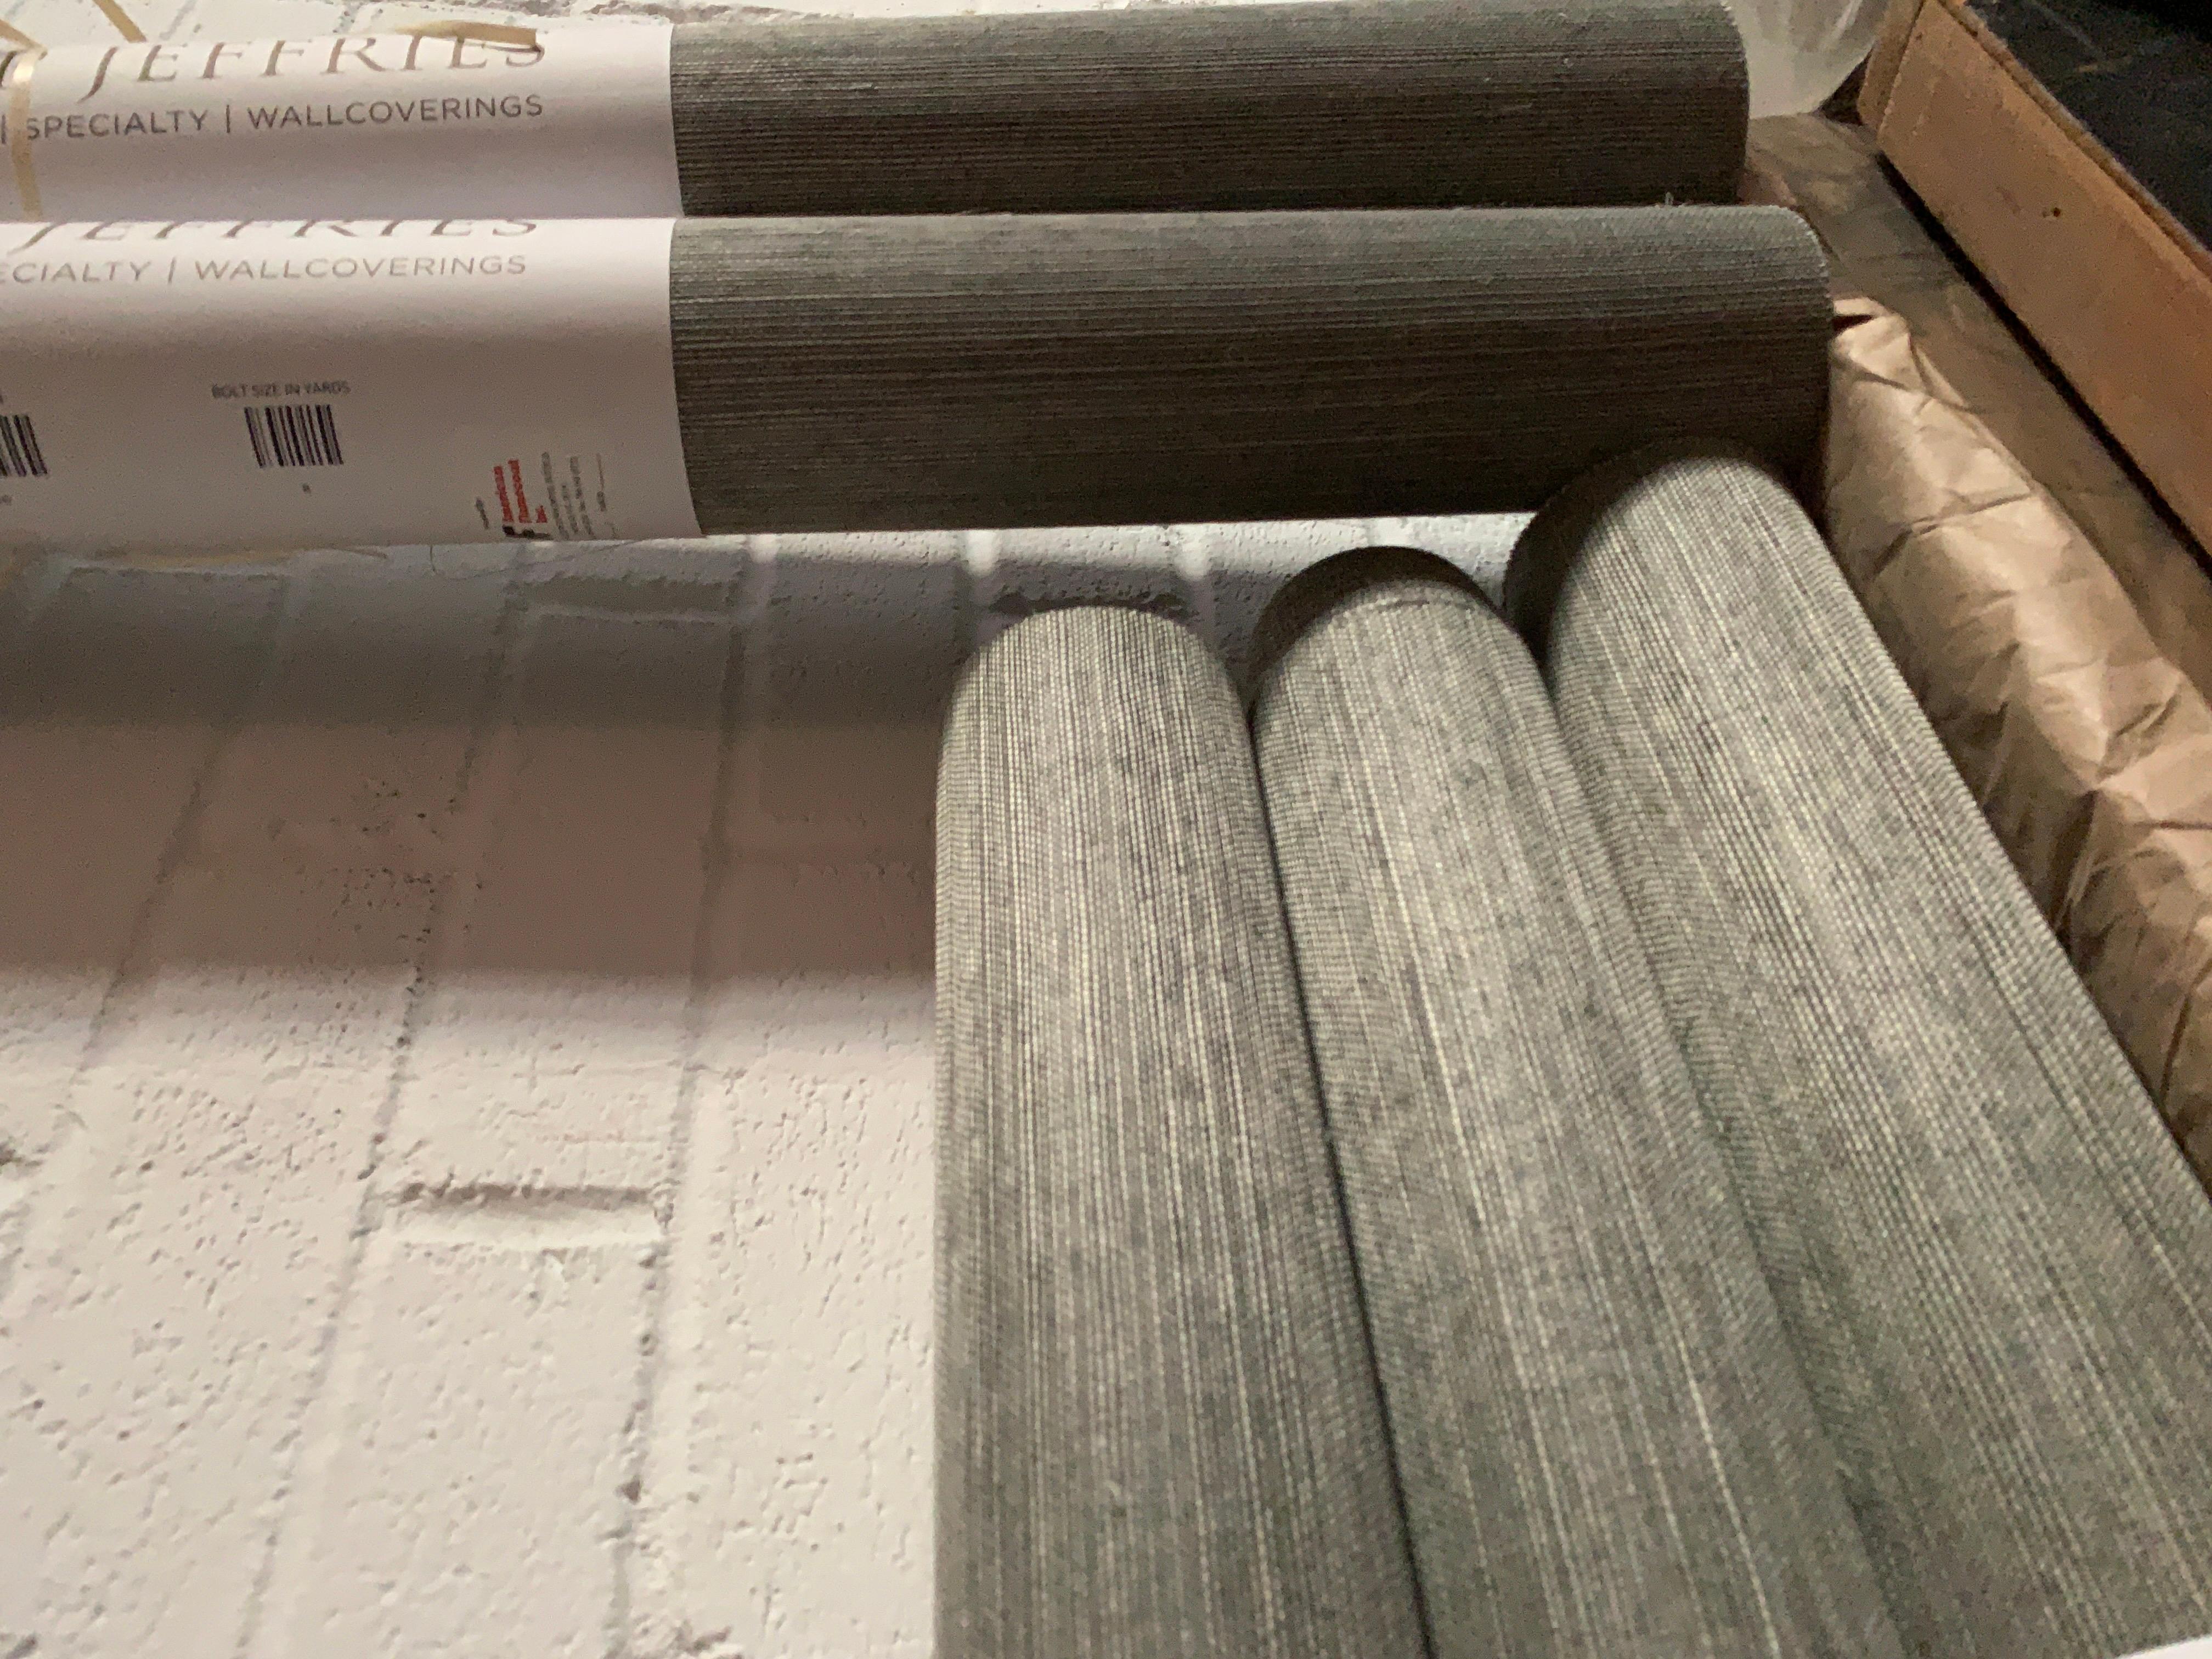 Phillip Jeffries Manila Hemp Grasscloth wallpaper French gray - 3444 Graphite; 40th Anniversary Limited Edition. MSRP 99.99 per yard (800 USD for an 8 yard roll). Listing is for one roll. Multiple available. Please change quantity to desired amount.